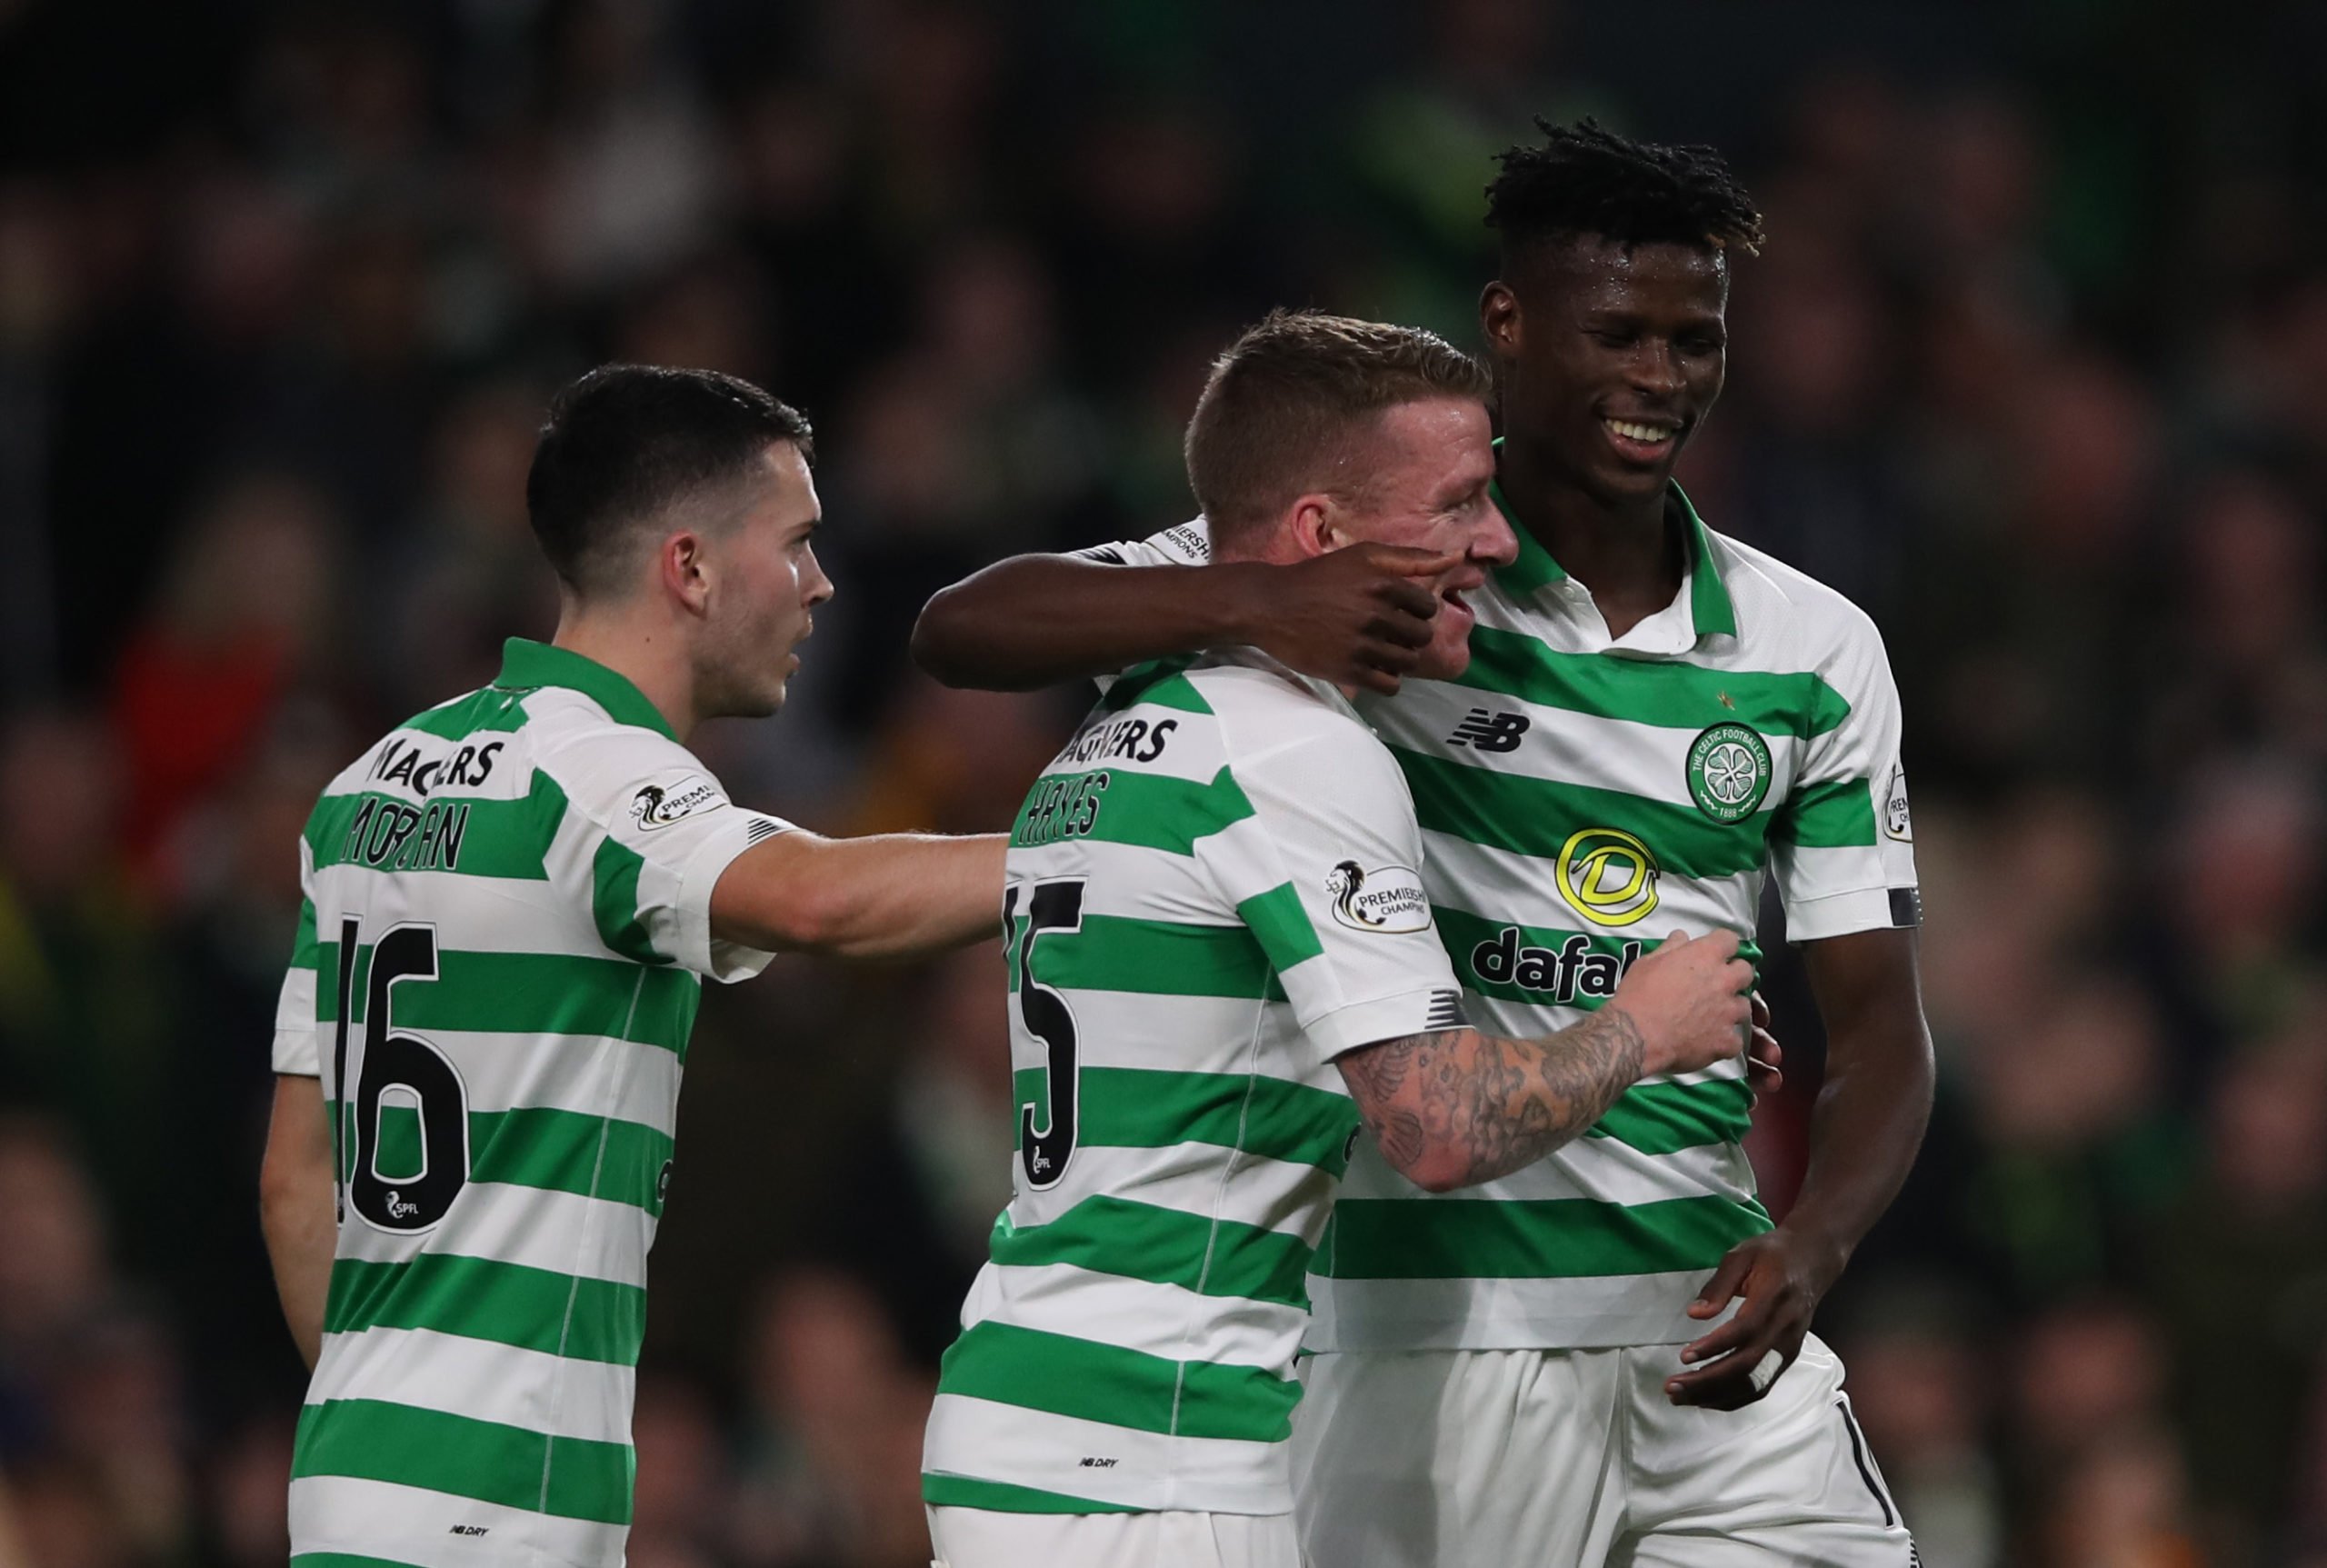 Watch as clinical Bayo strikes again; the only in-form Celtic striker